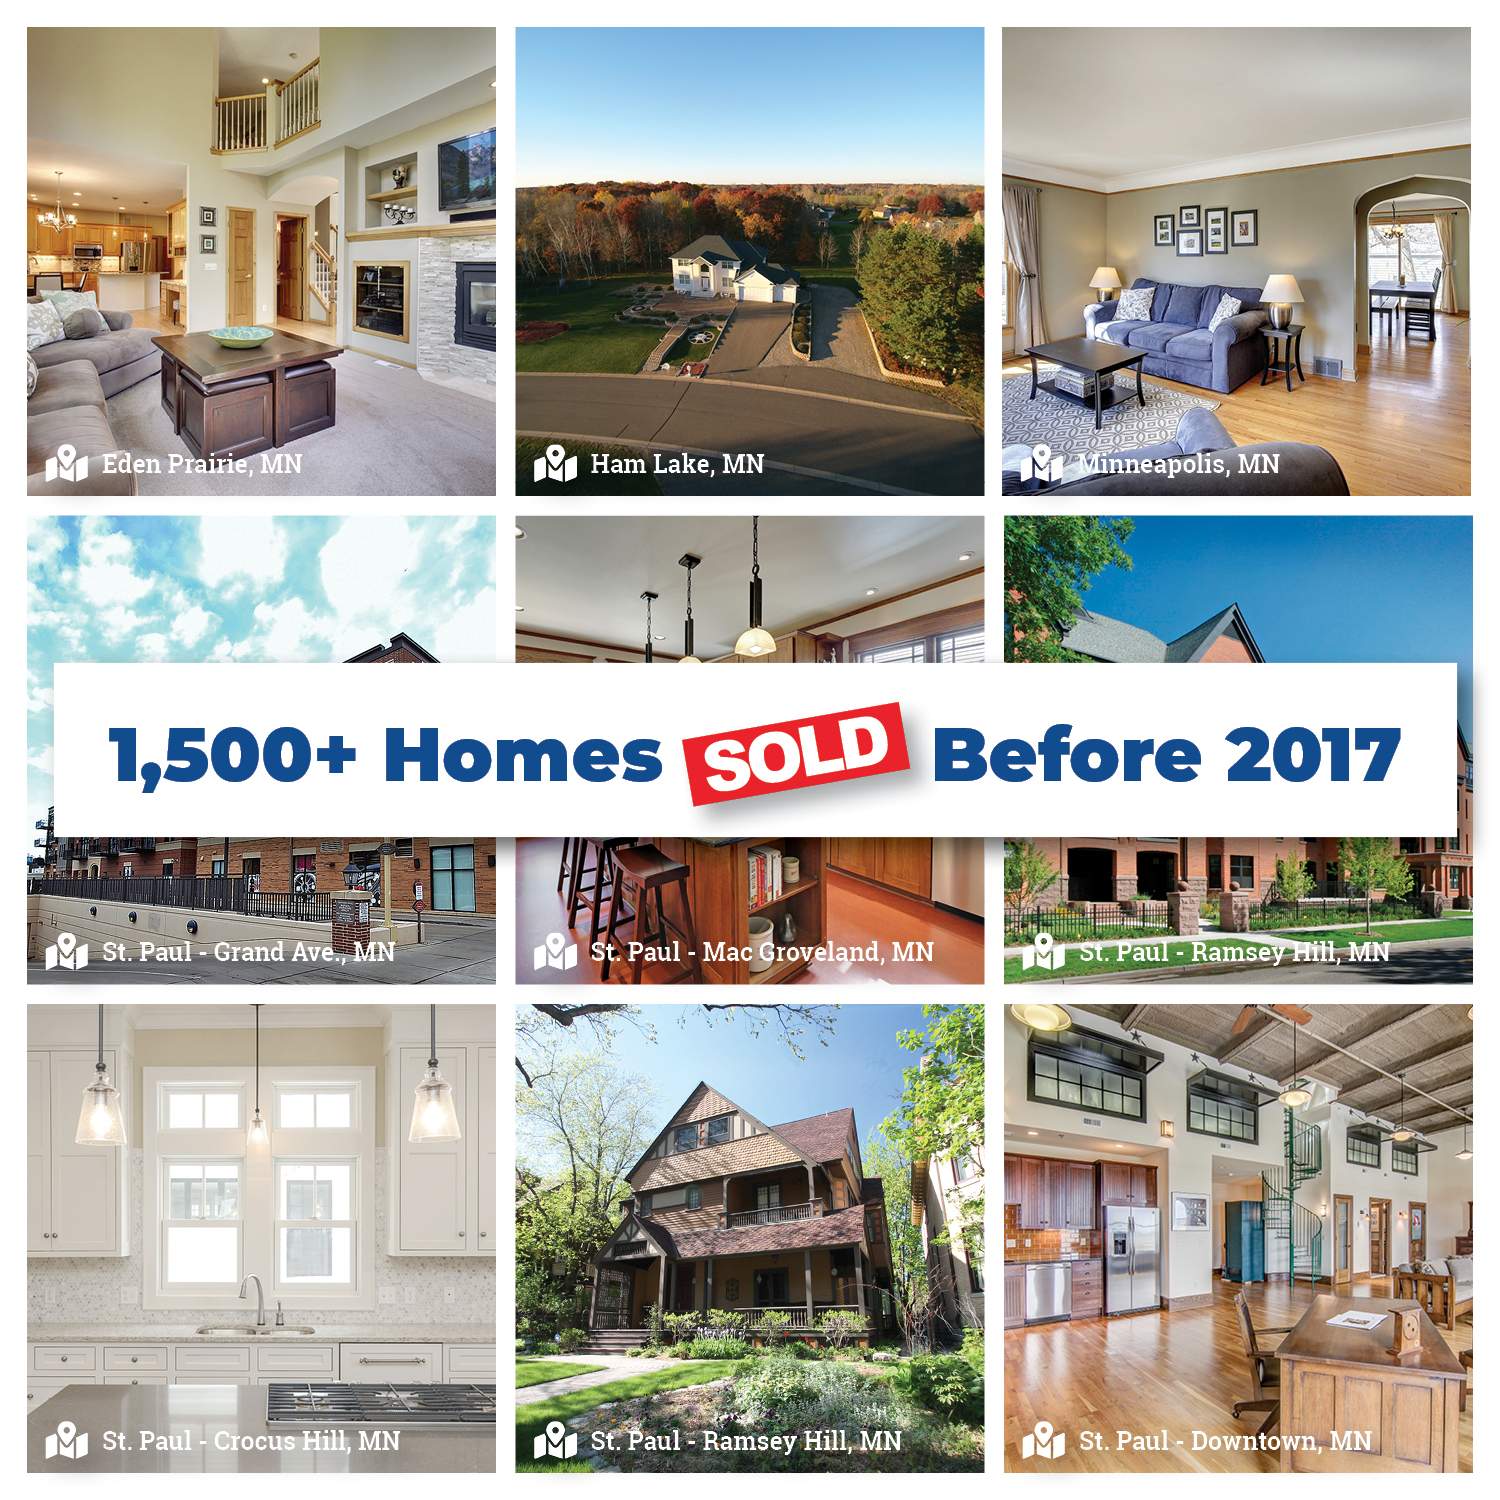 Sold Homes Prior to 2017